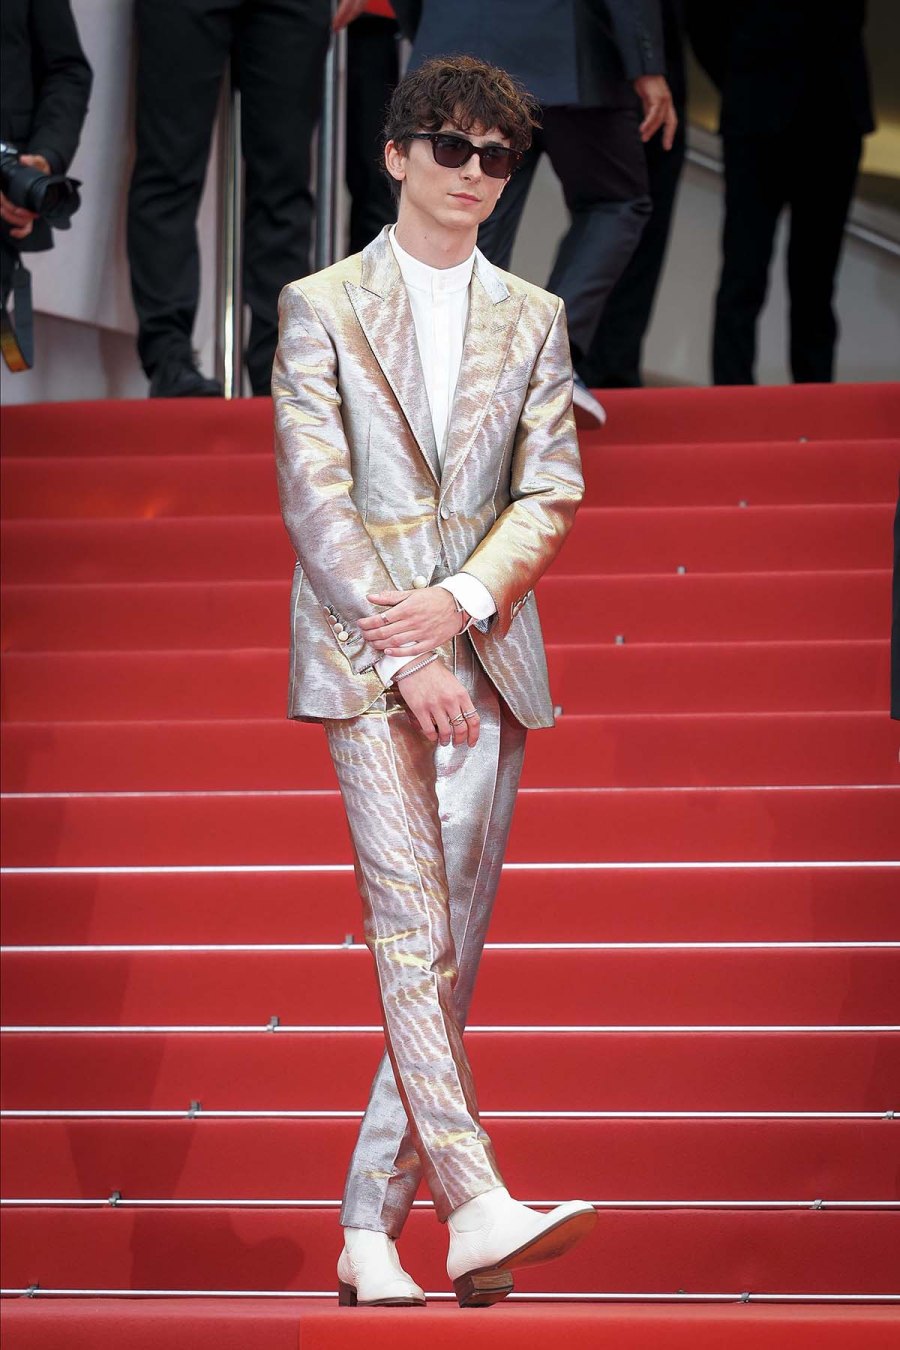 Timothee Chalamets Best Most Buzzed About Red Carpet Looks All Time